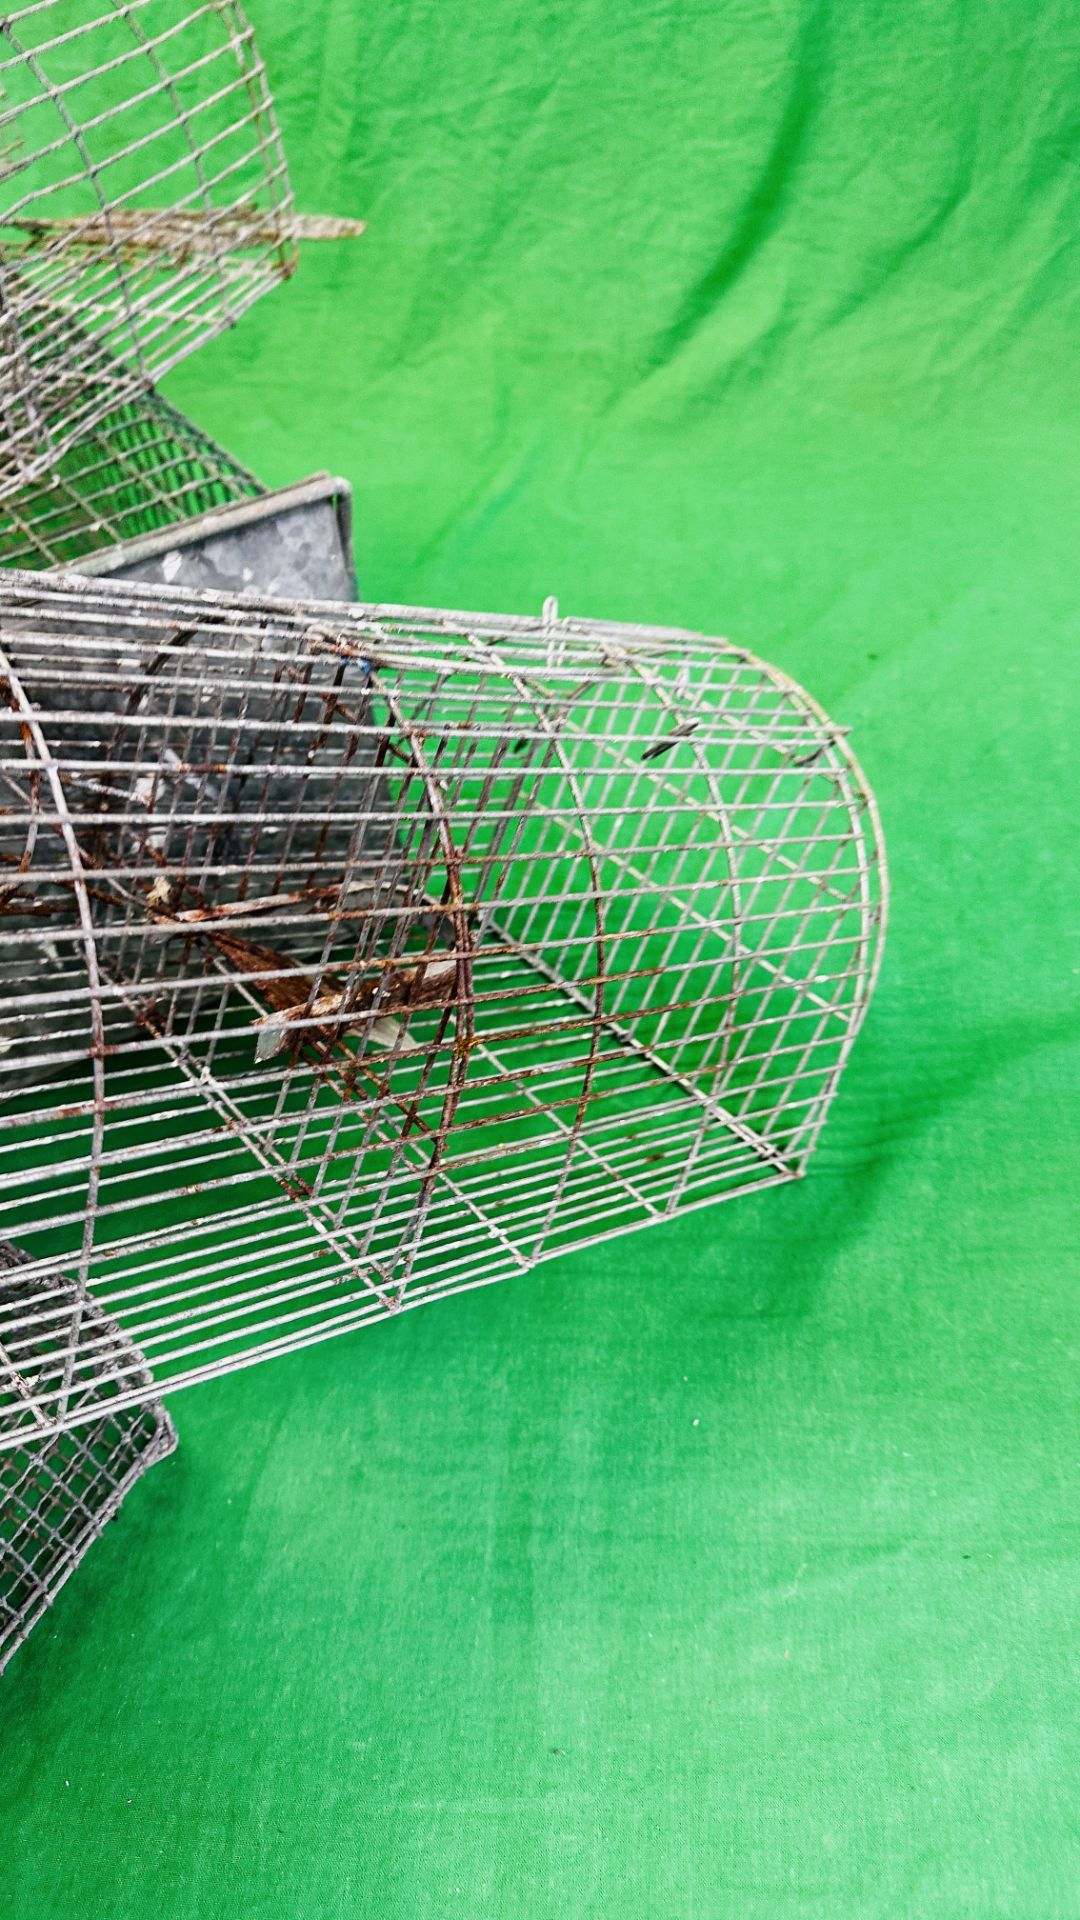 A GROUP OF FIVE HUMANE TRAPS - Image 4 of 8